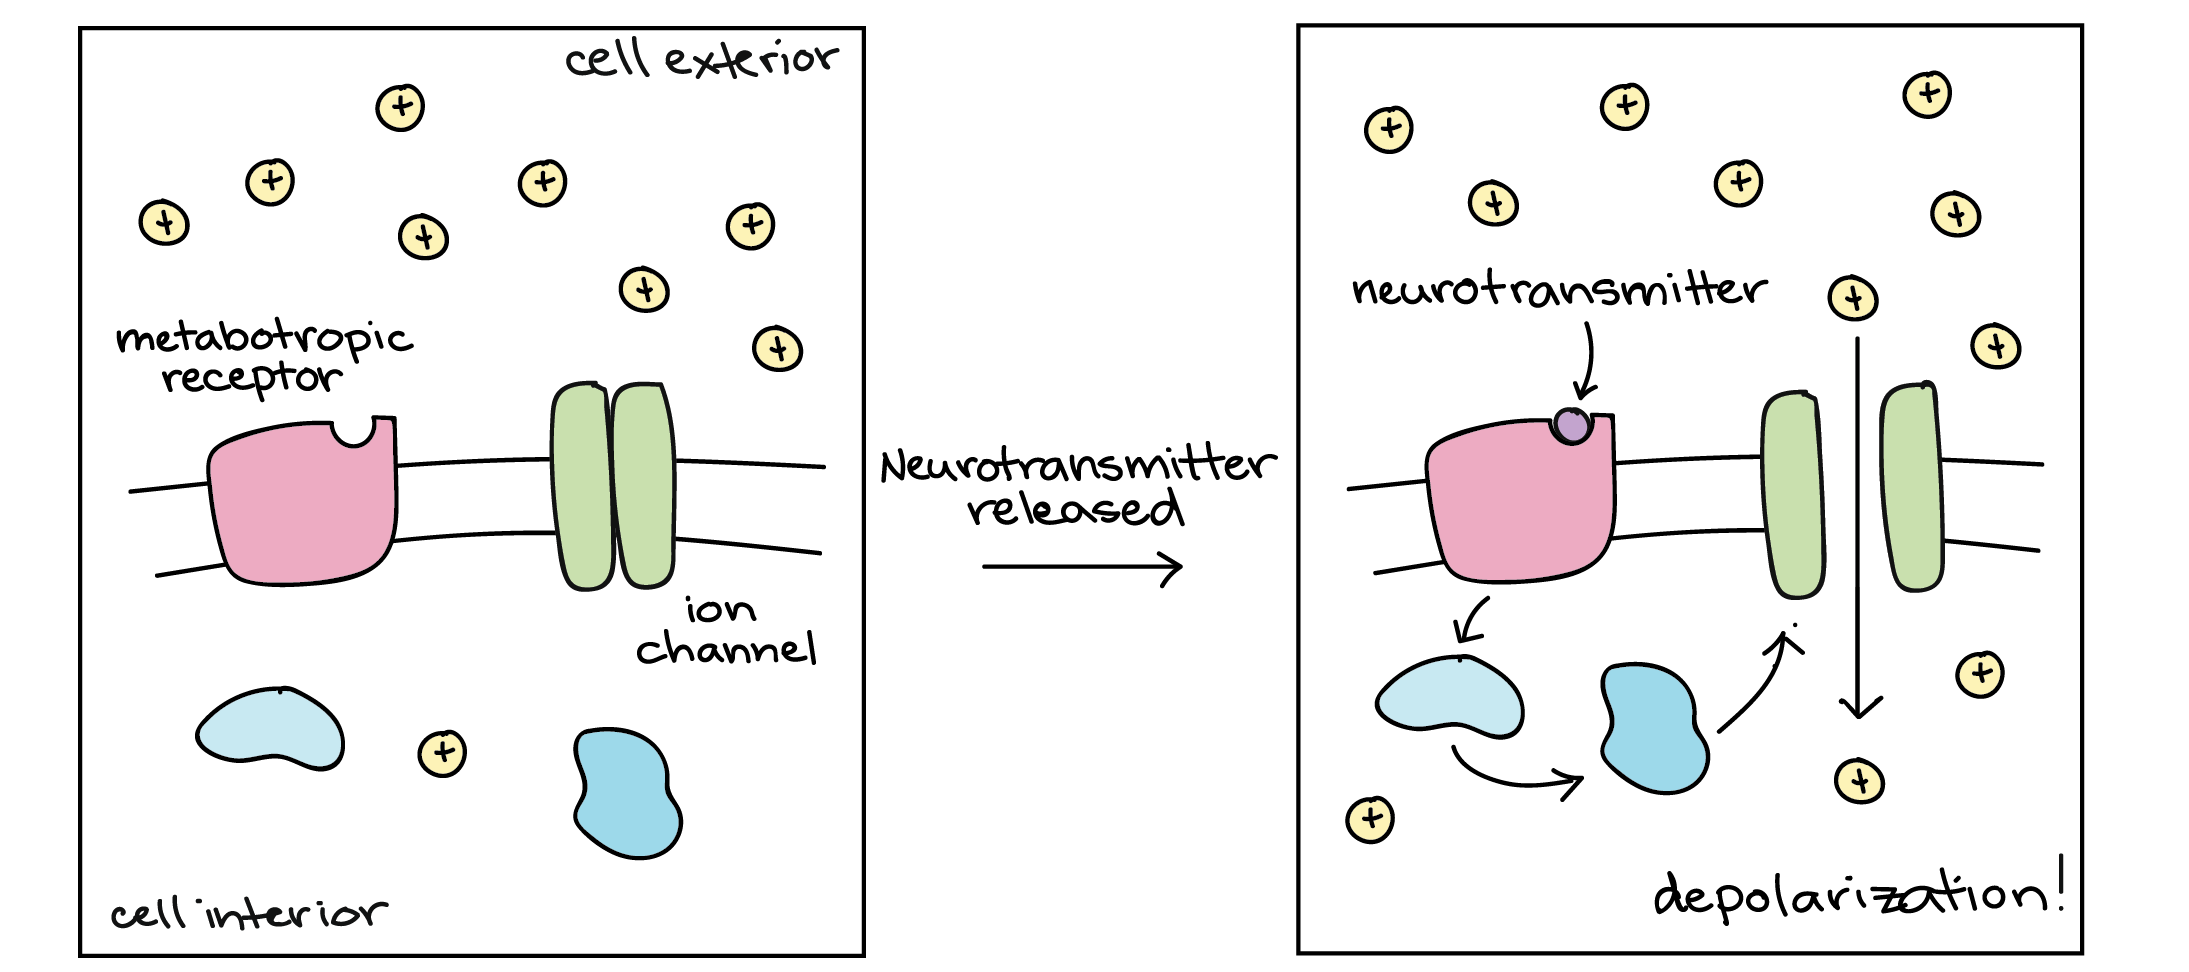 Diagram of one way that a metabotropic receptor can act. The ligand binds to the receptor, which triggers a signaling cascade inside the cell. The signaling cascade causes the ion channel to open, allowing cations to flow down their concentration gradient and into the cell, resulting in a depolarization.